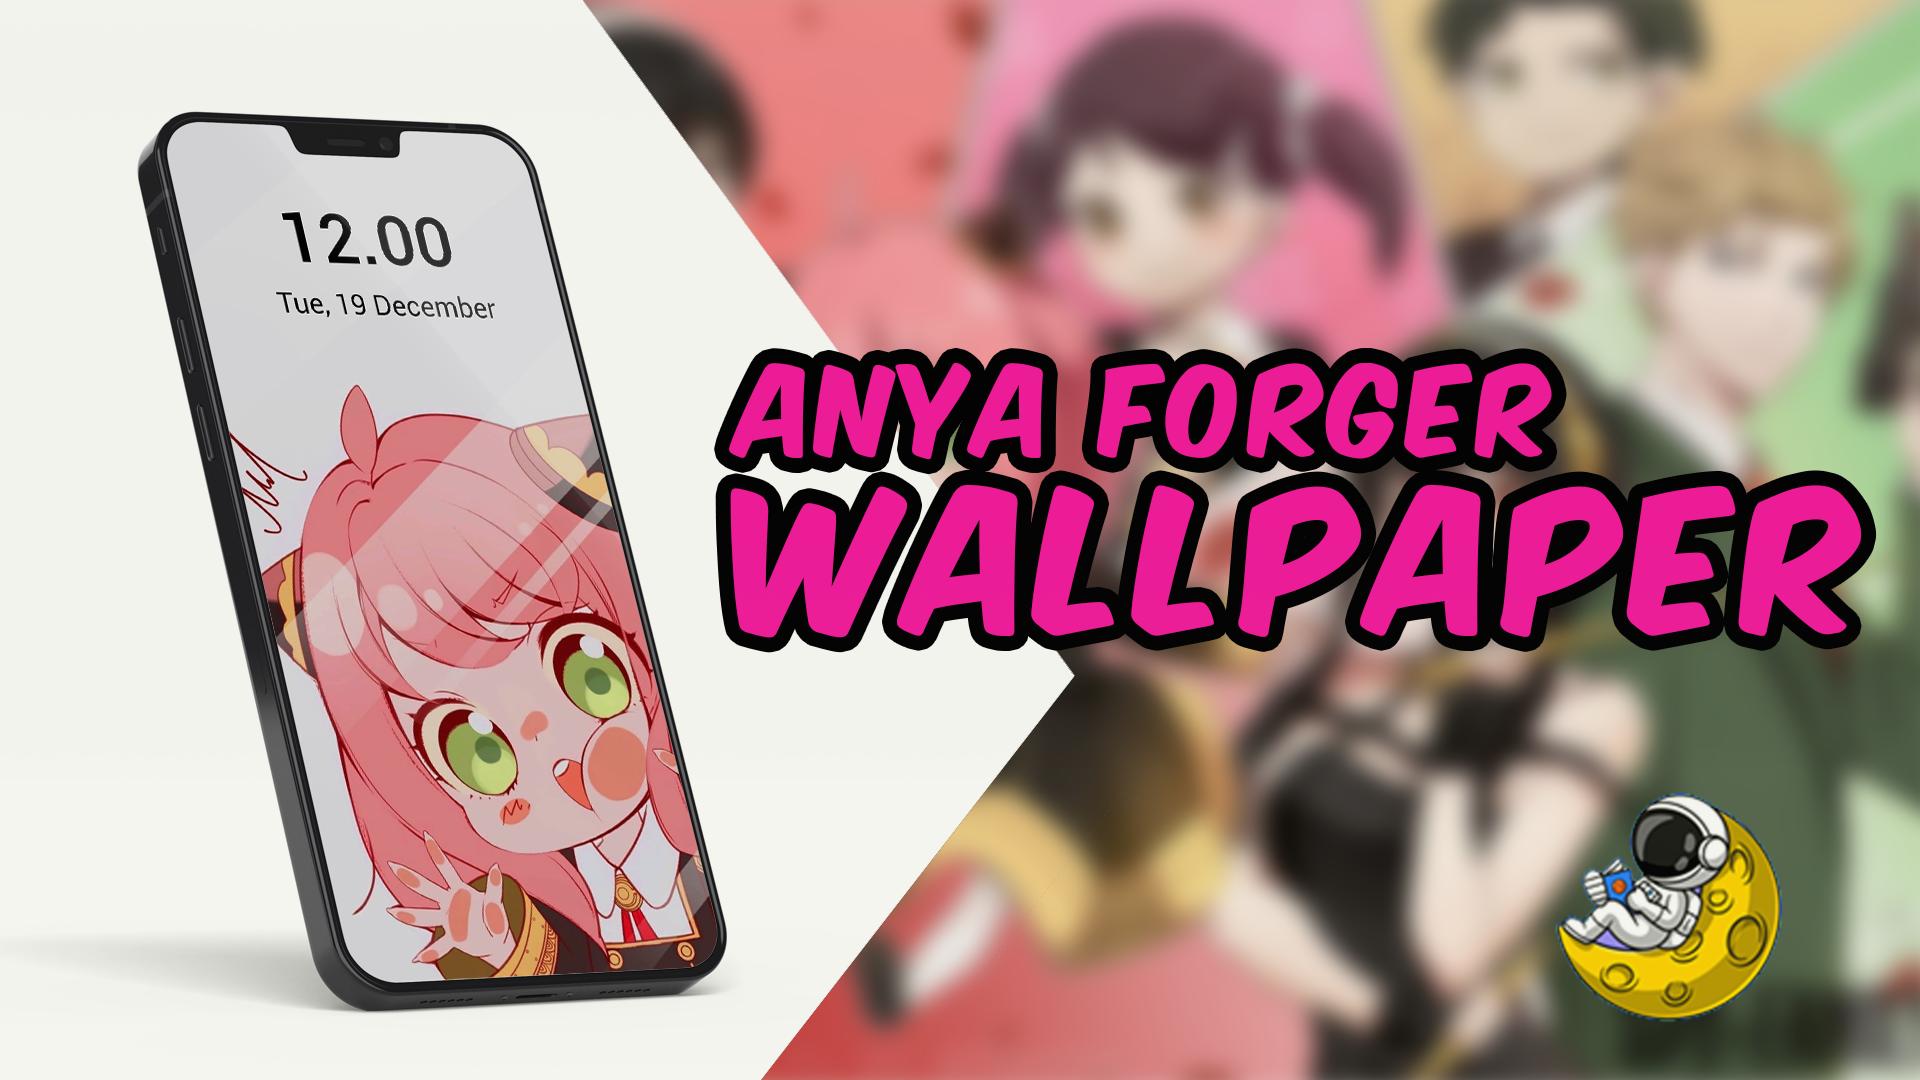 Loid and Anya Forger Spy X Family Wallpaper 4k Ultra HD ID9909